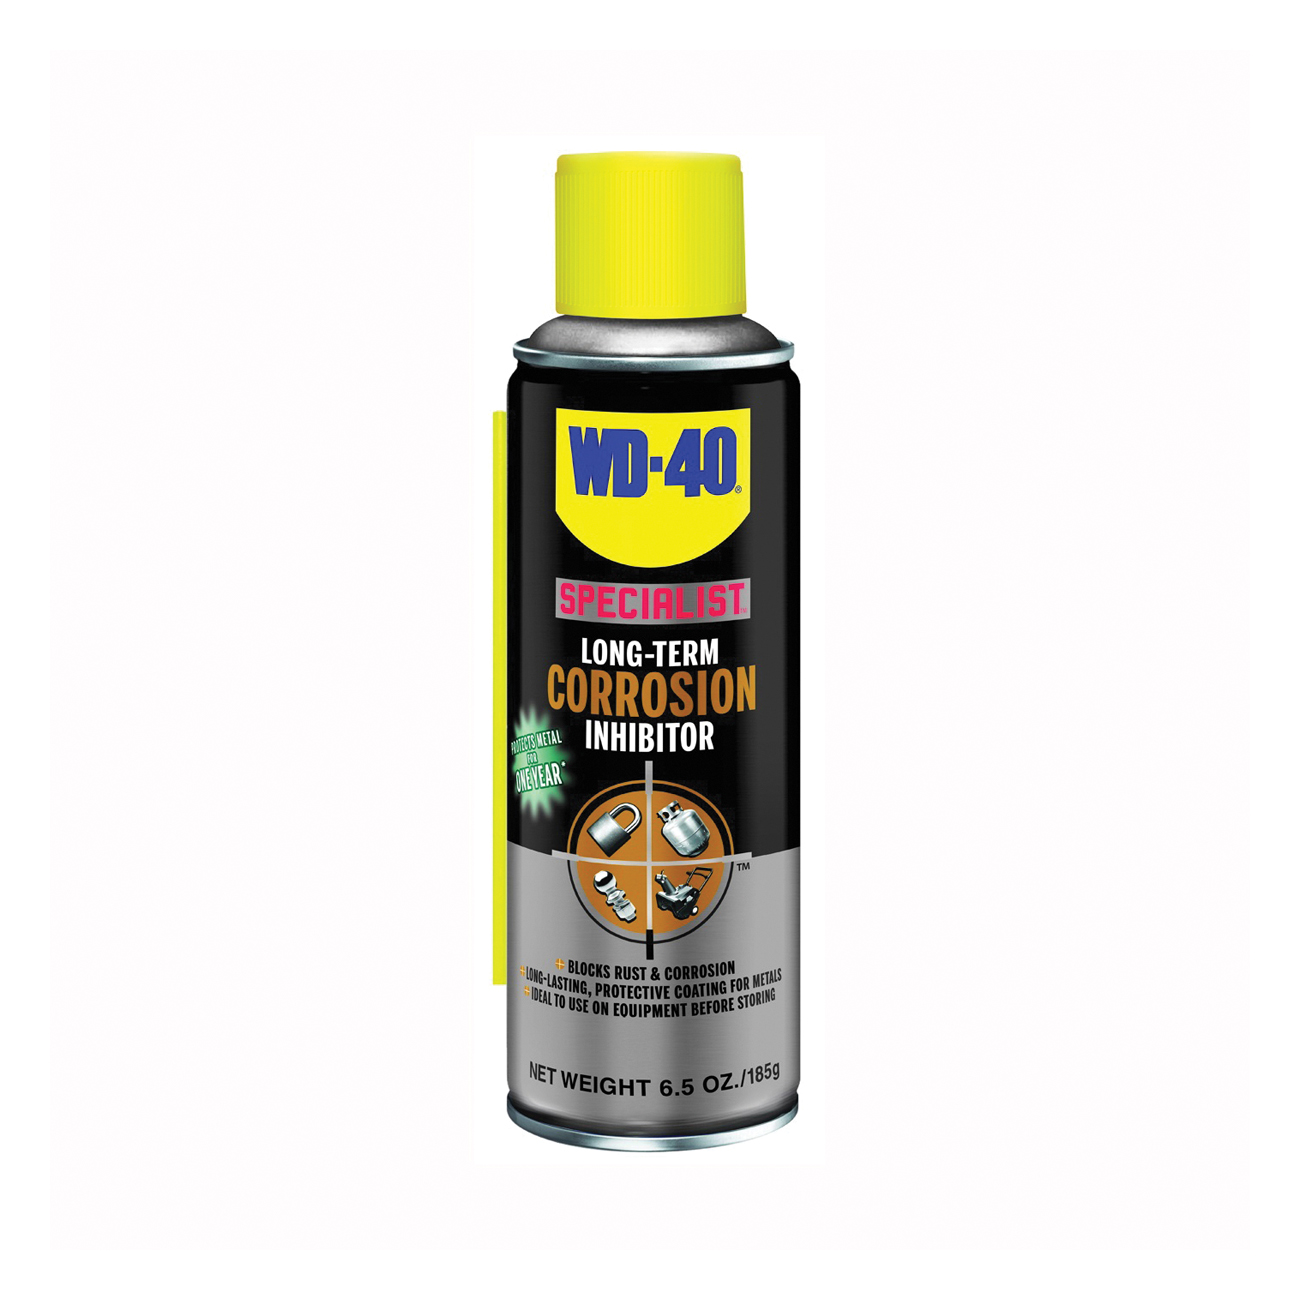 WD-40 300035